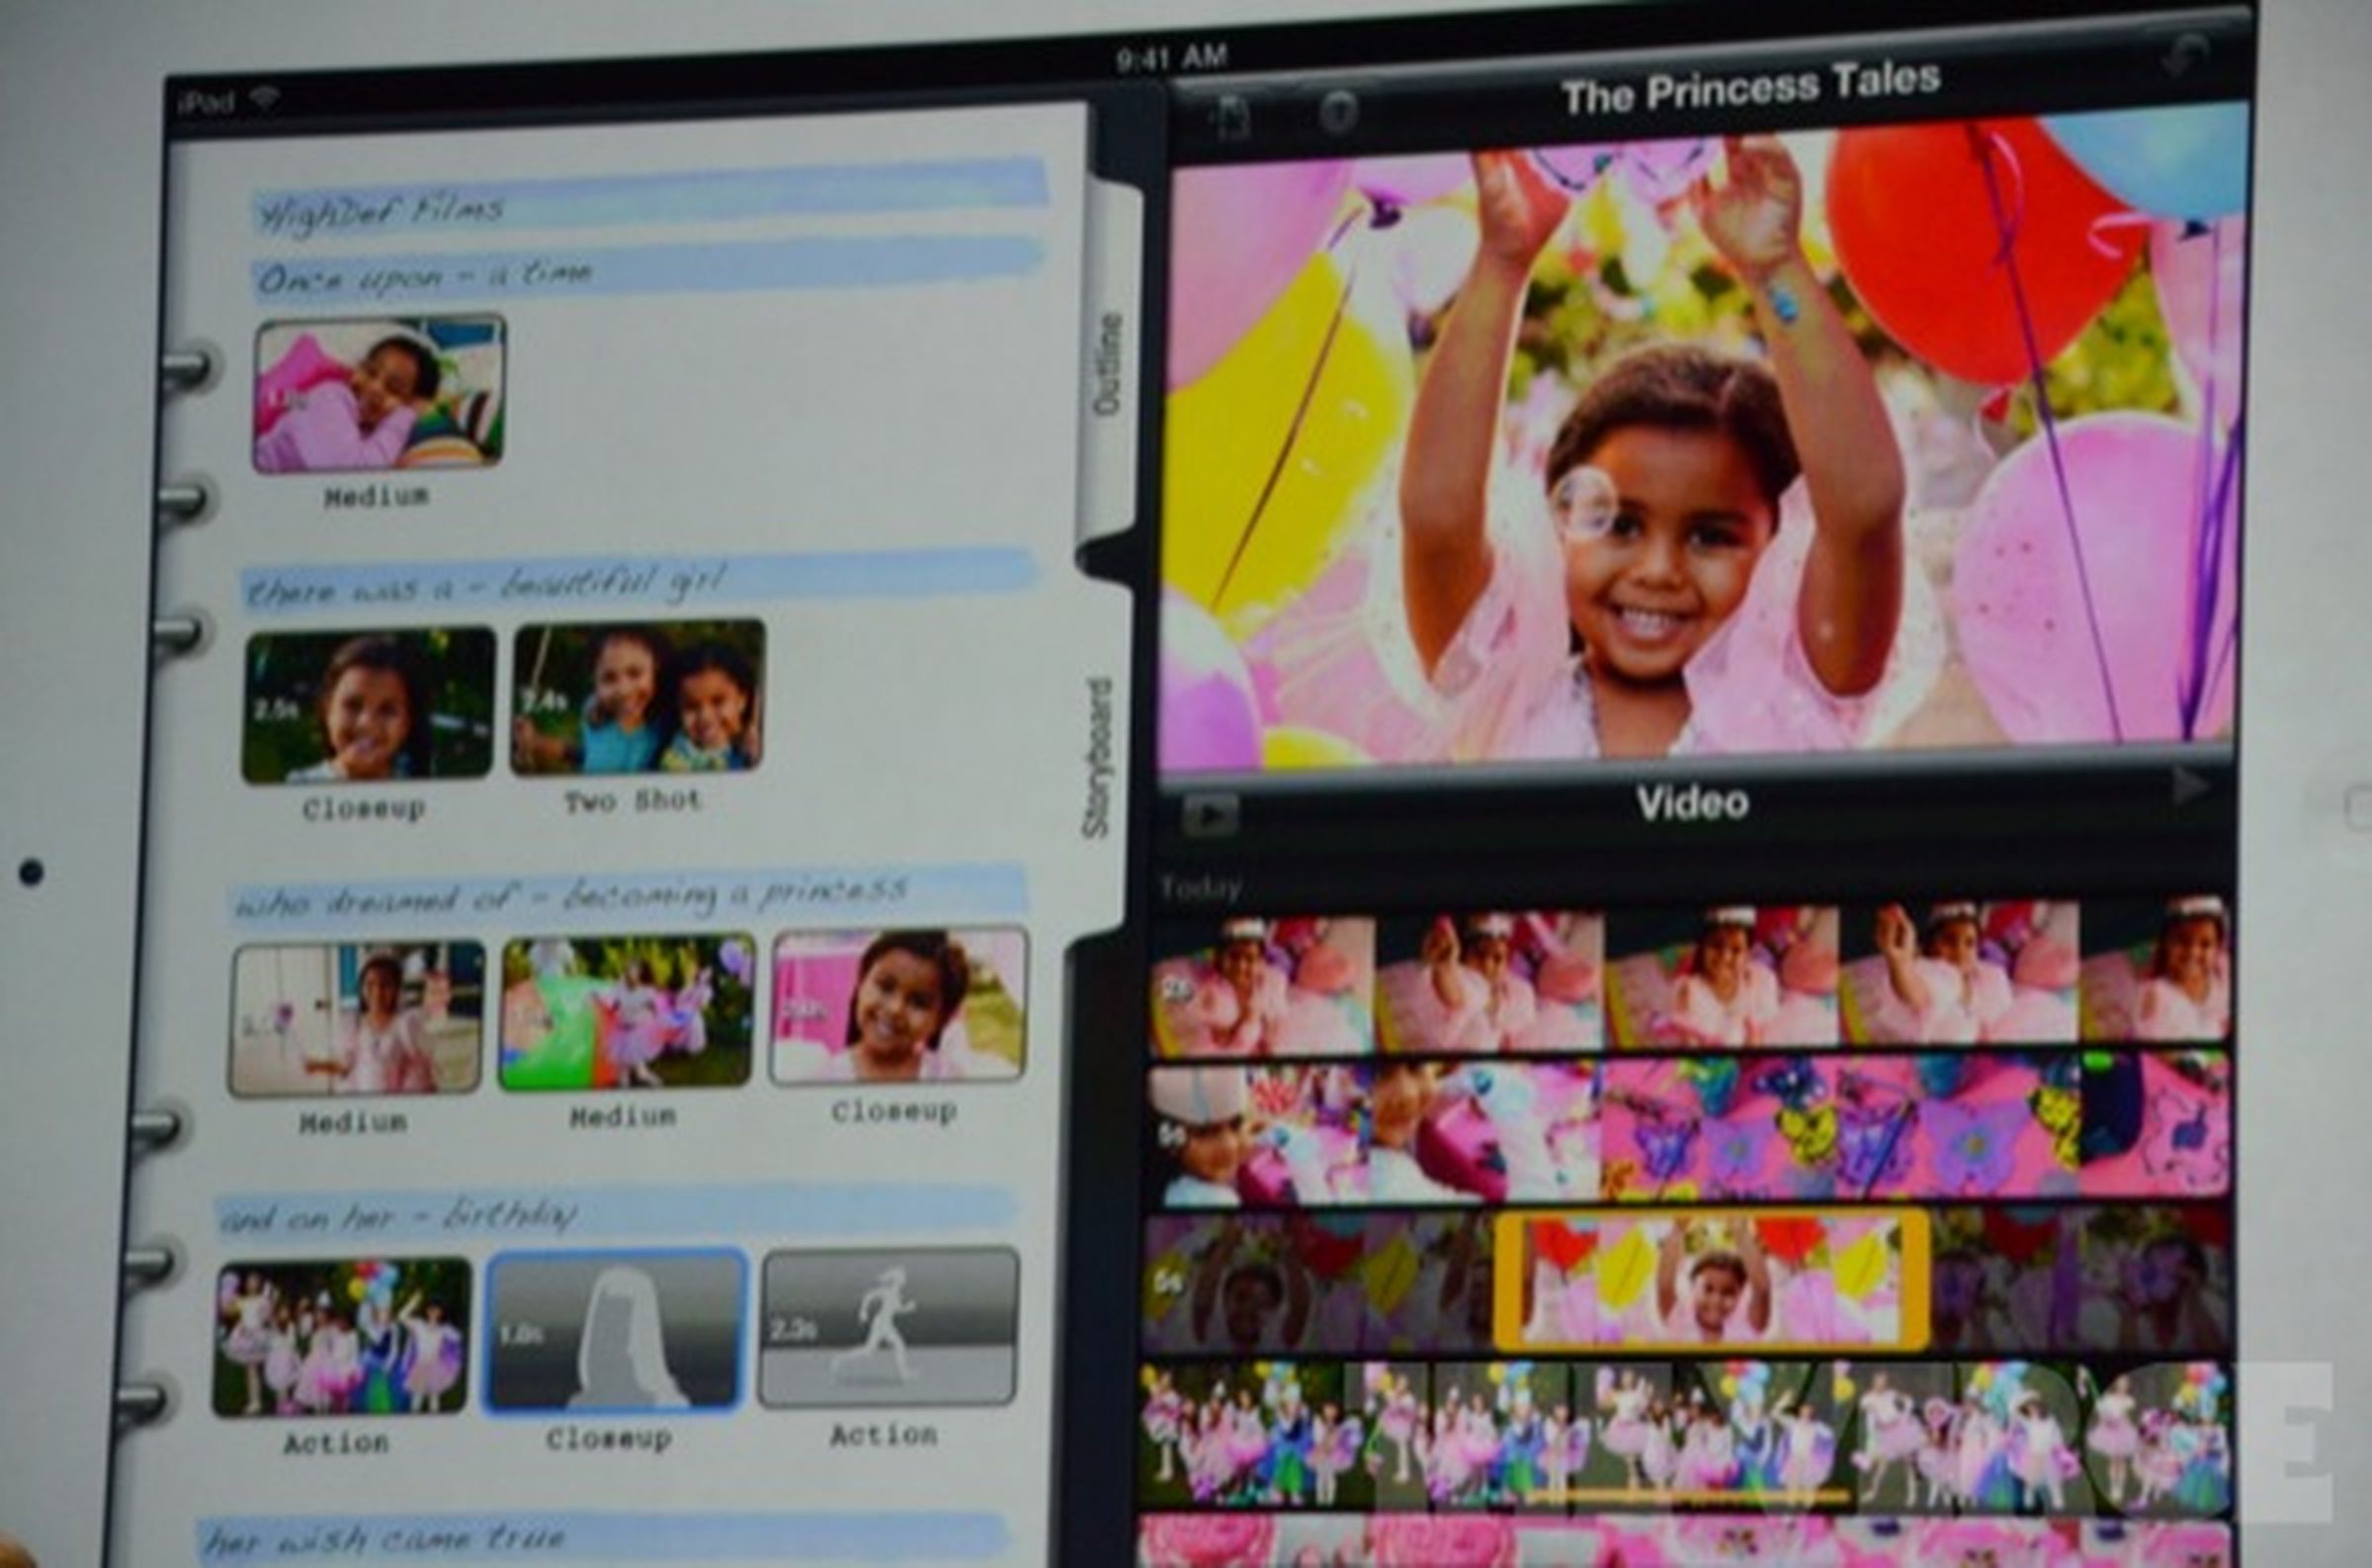 Updated iMovie app photos for the new iPad